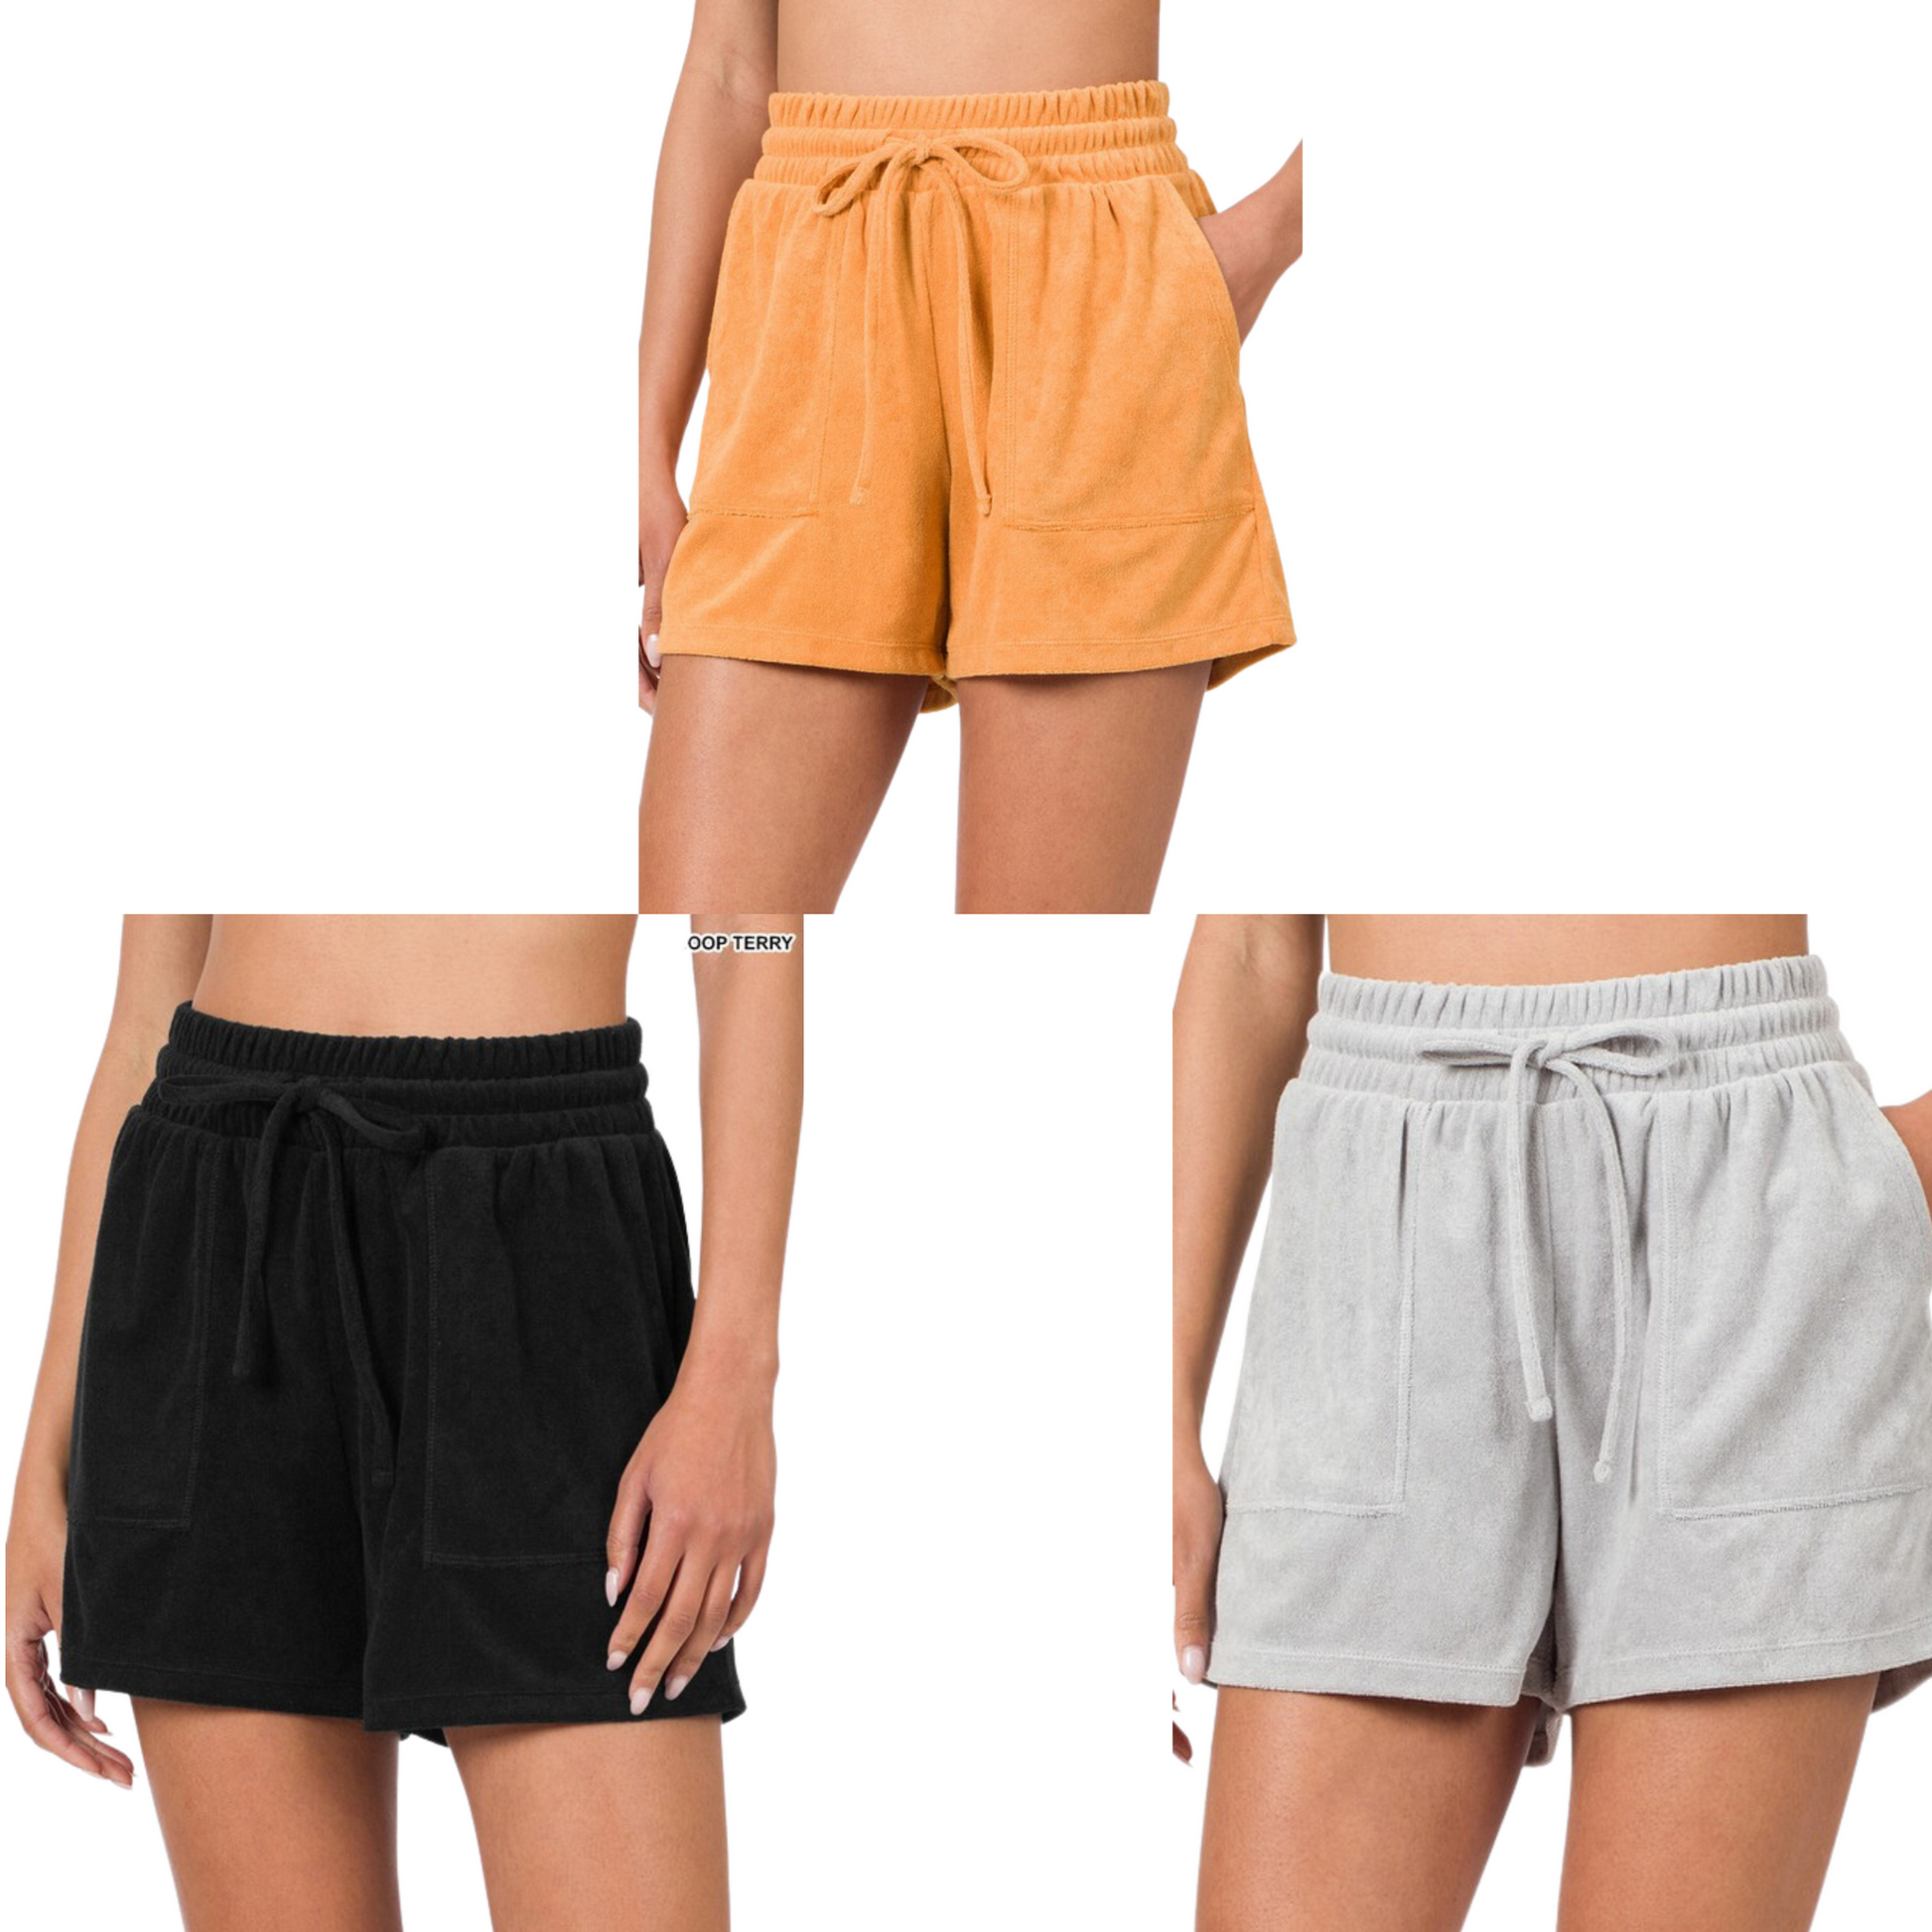 Our Drawstring Shorts are comfortable and stylish, showcasing an elastic waist and drawstring fastening for an adjustable fit. Crafted from soft terry cloth in muted mustard, grey, and black hues, these classic shorts are perfect for everyday wear.